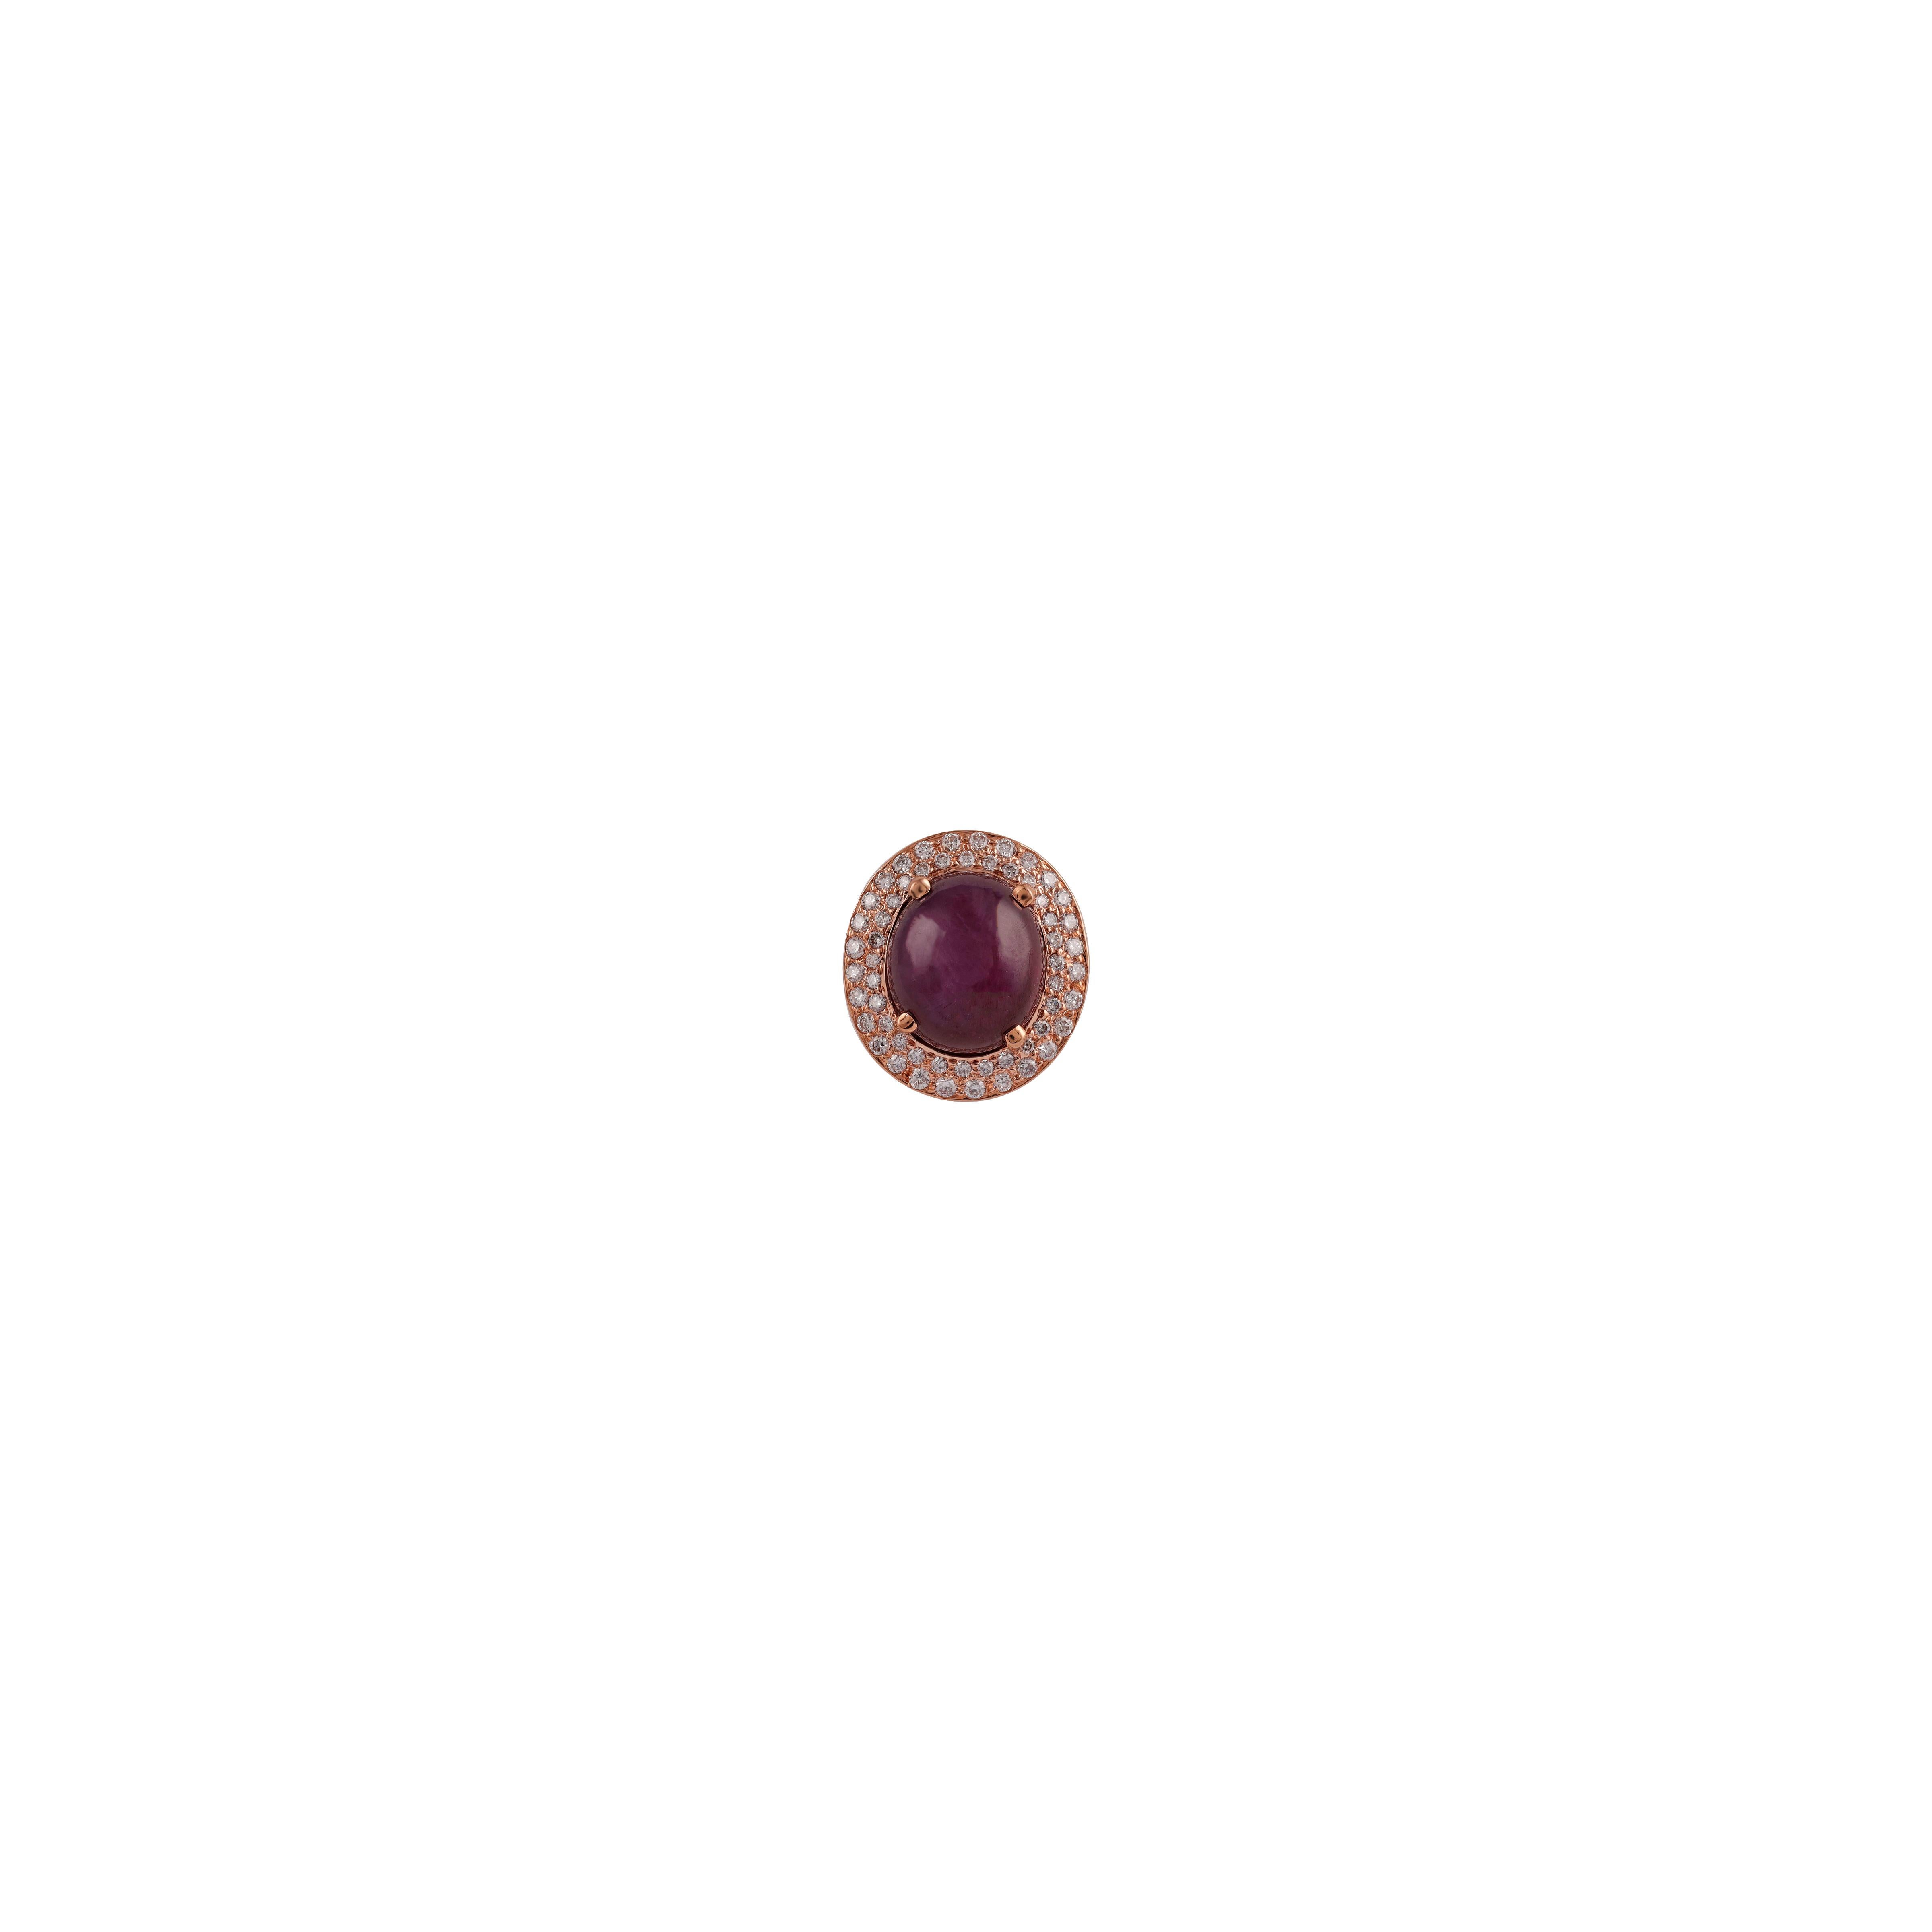 Cabochon Star Ruby 6.24 Carat, Diamond Ring Come Pendant Necklace in Solid 18k Rose Gold For Sale